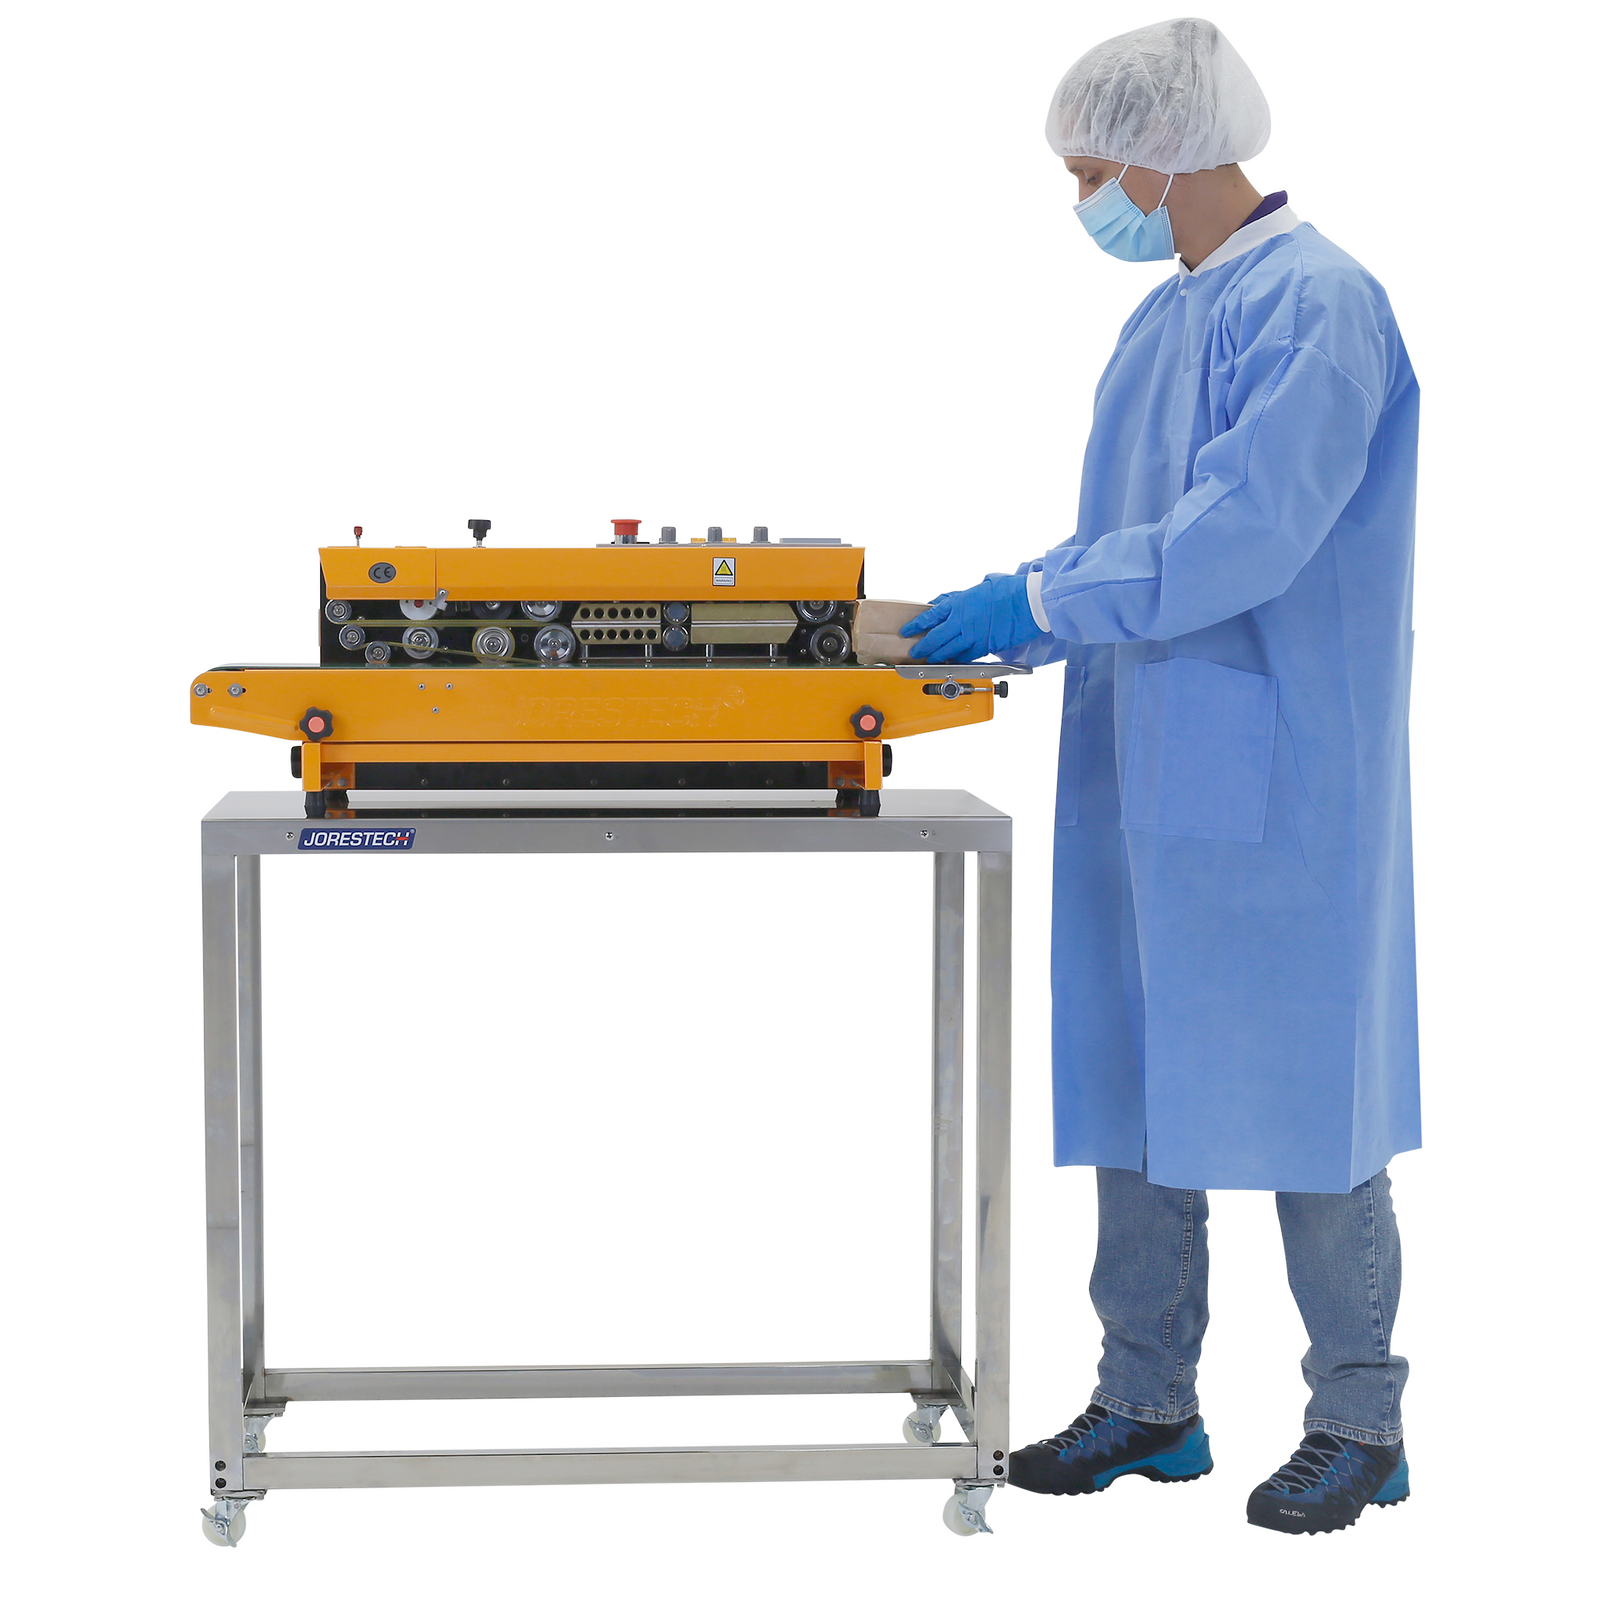 A person wearing disposable PPE and nitrile gloves using a continuos band sealer which is positioned on top of a JORES TECHNOLOGIES® Stainless steel prep work table